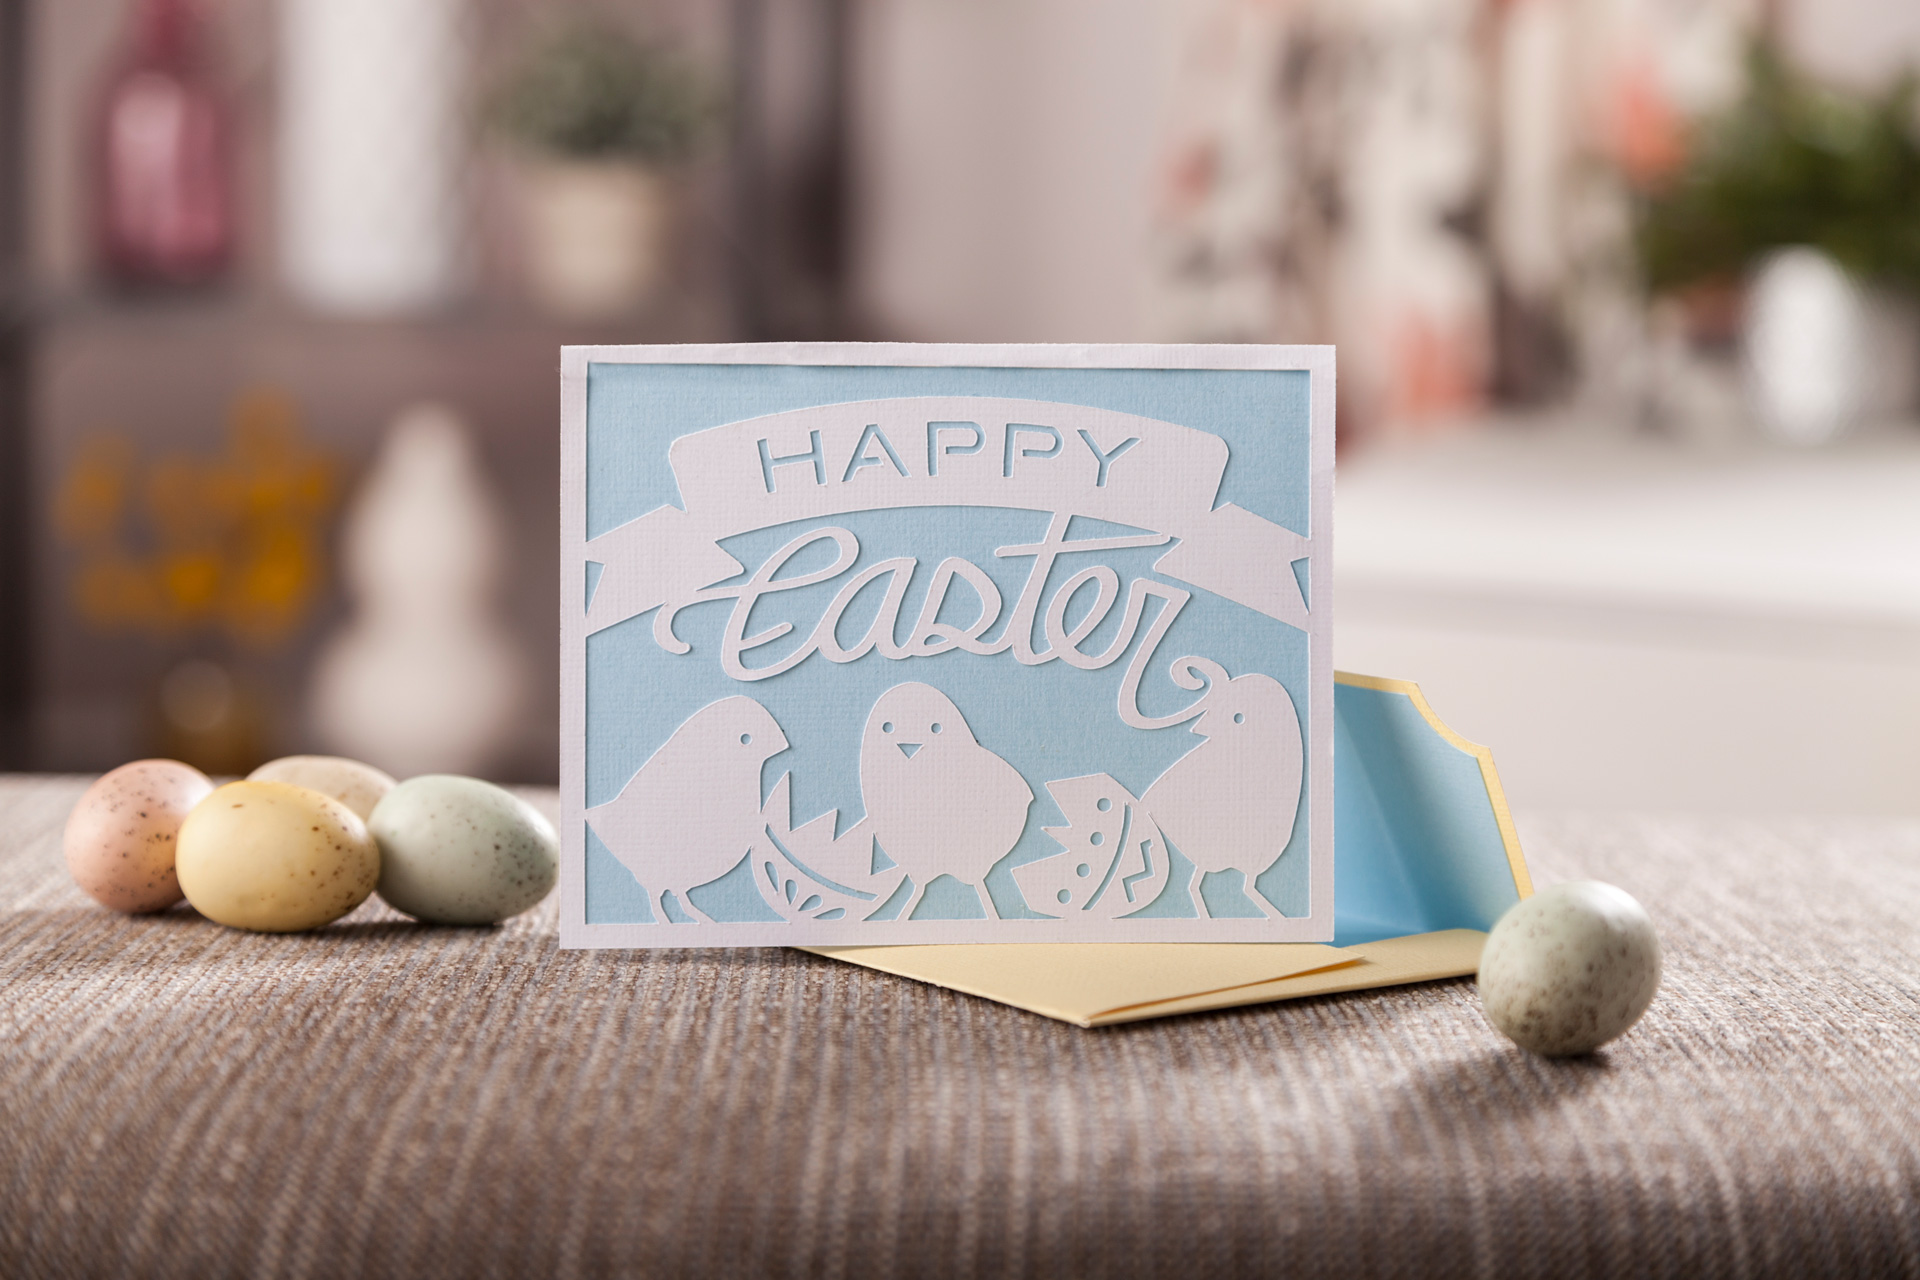 Blue and White Happy Easter Card cut by Cricut